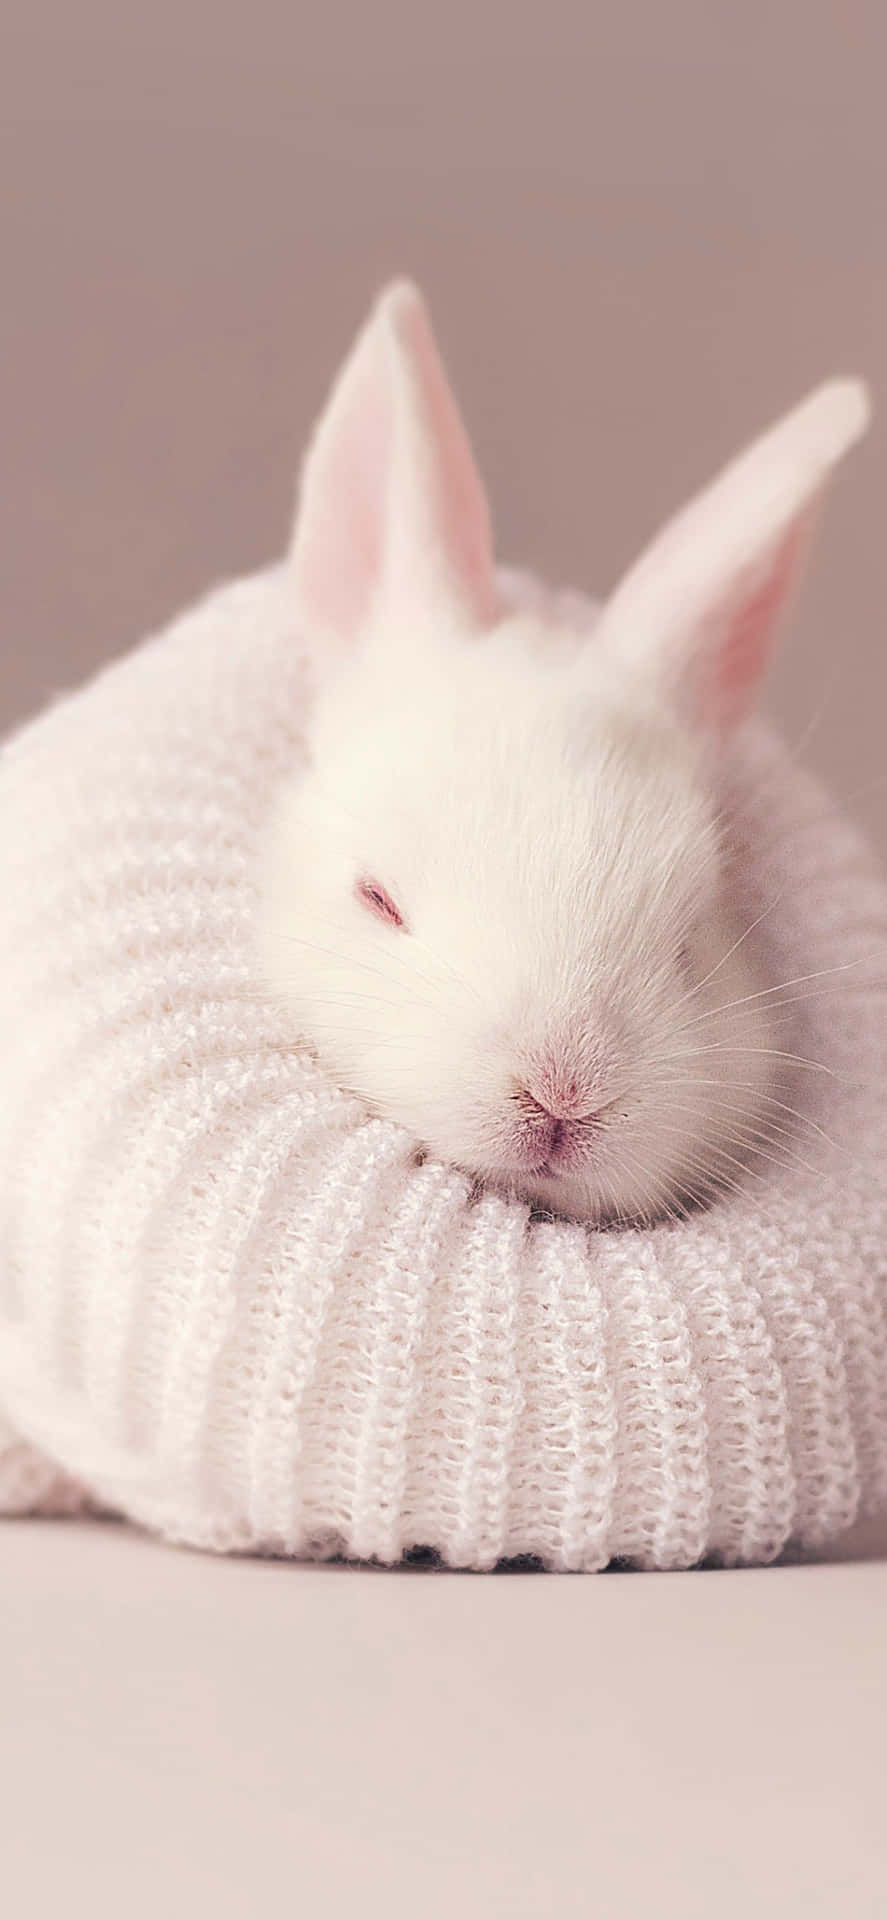 Get the cutest bunny ever into your pocket with the new iPhone Wallpaper